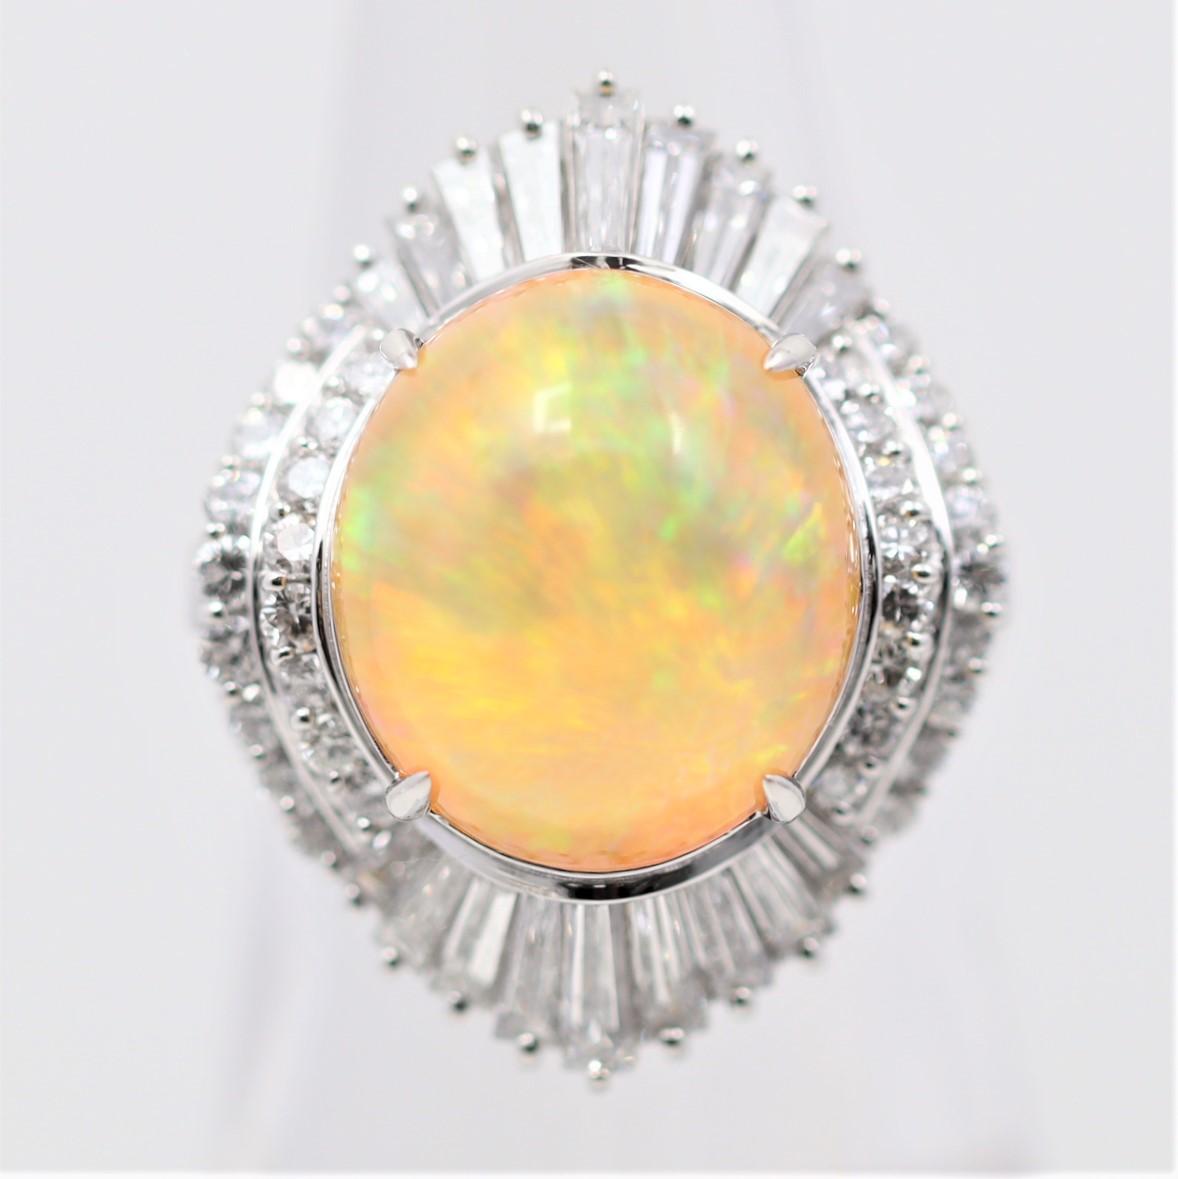 Calling all opal lovers!! We have a very special piece here with a 7.70 carat Mexican fire opal. It has absurd play-of-color, might be the finest I’ve seen in a fire opal, as an array of greens, blues, oranges, and reds radiate from the stone. It